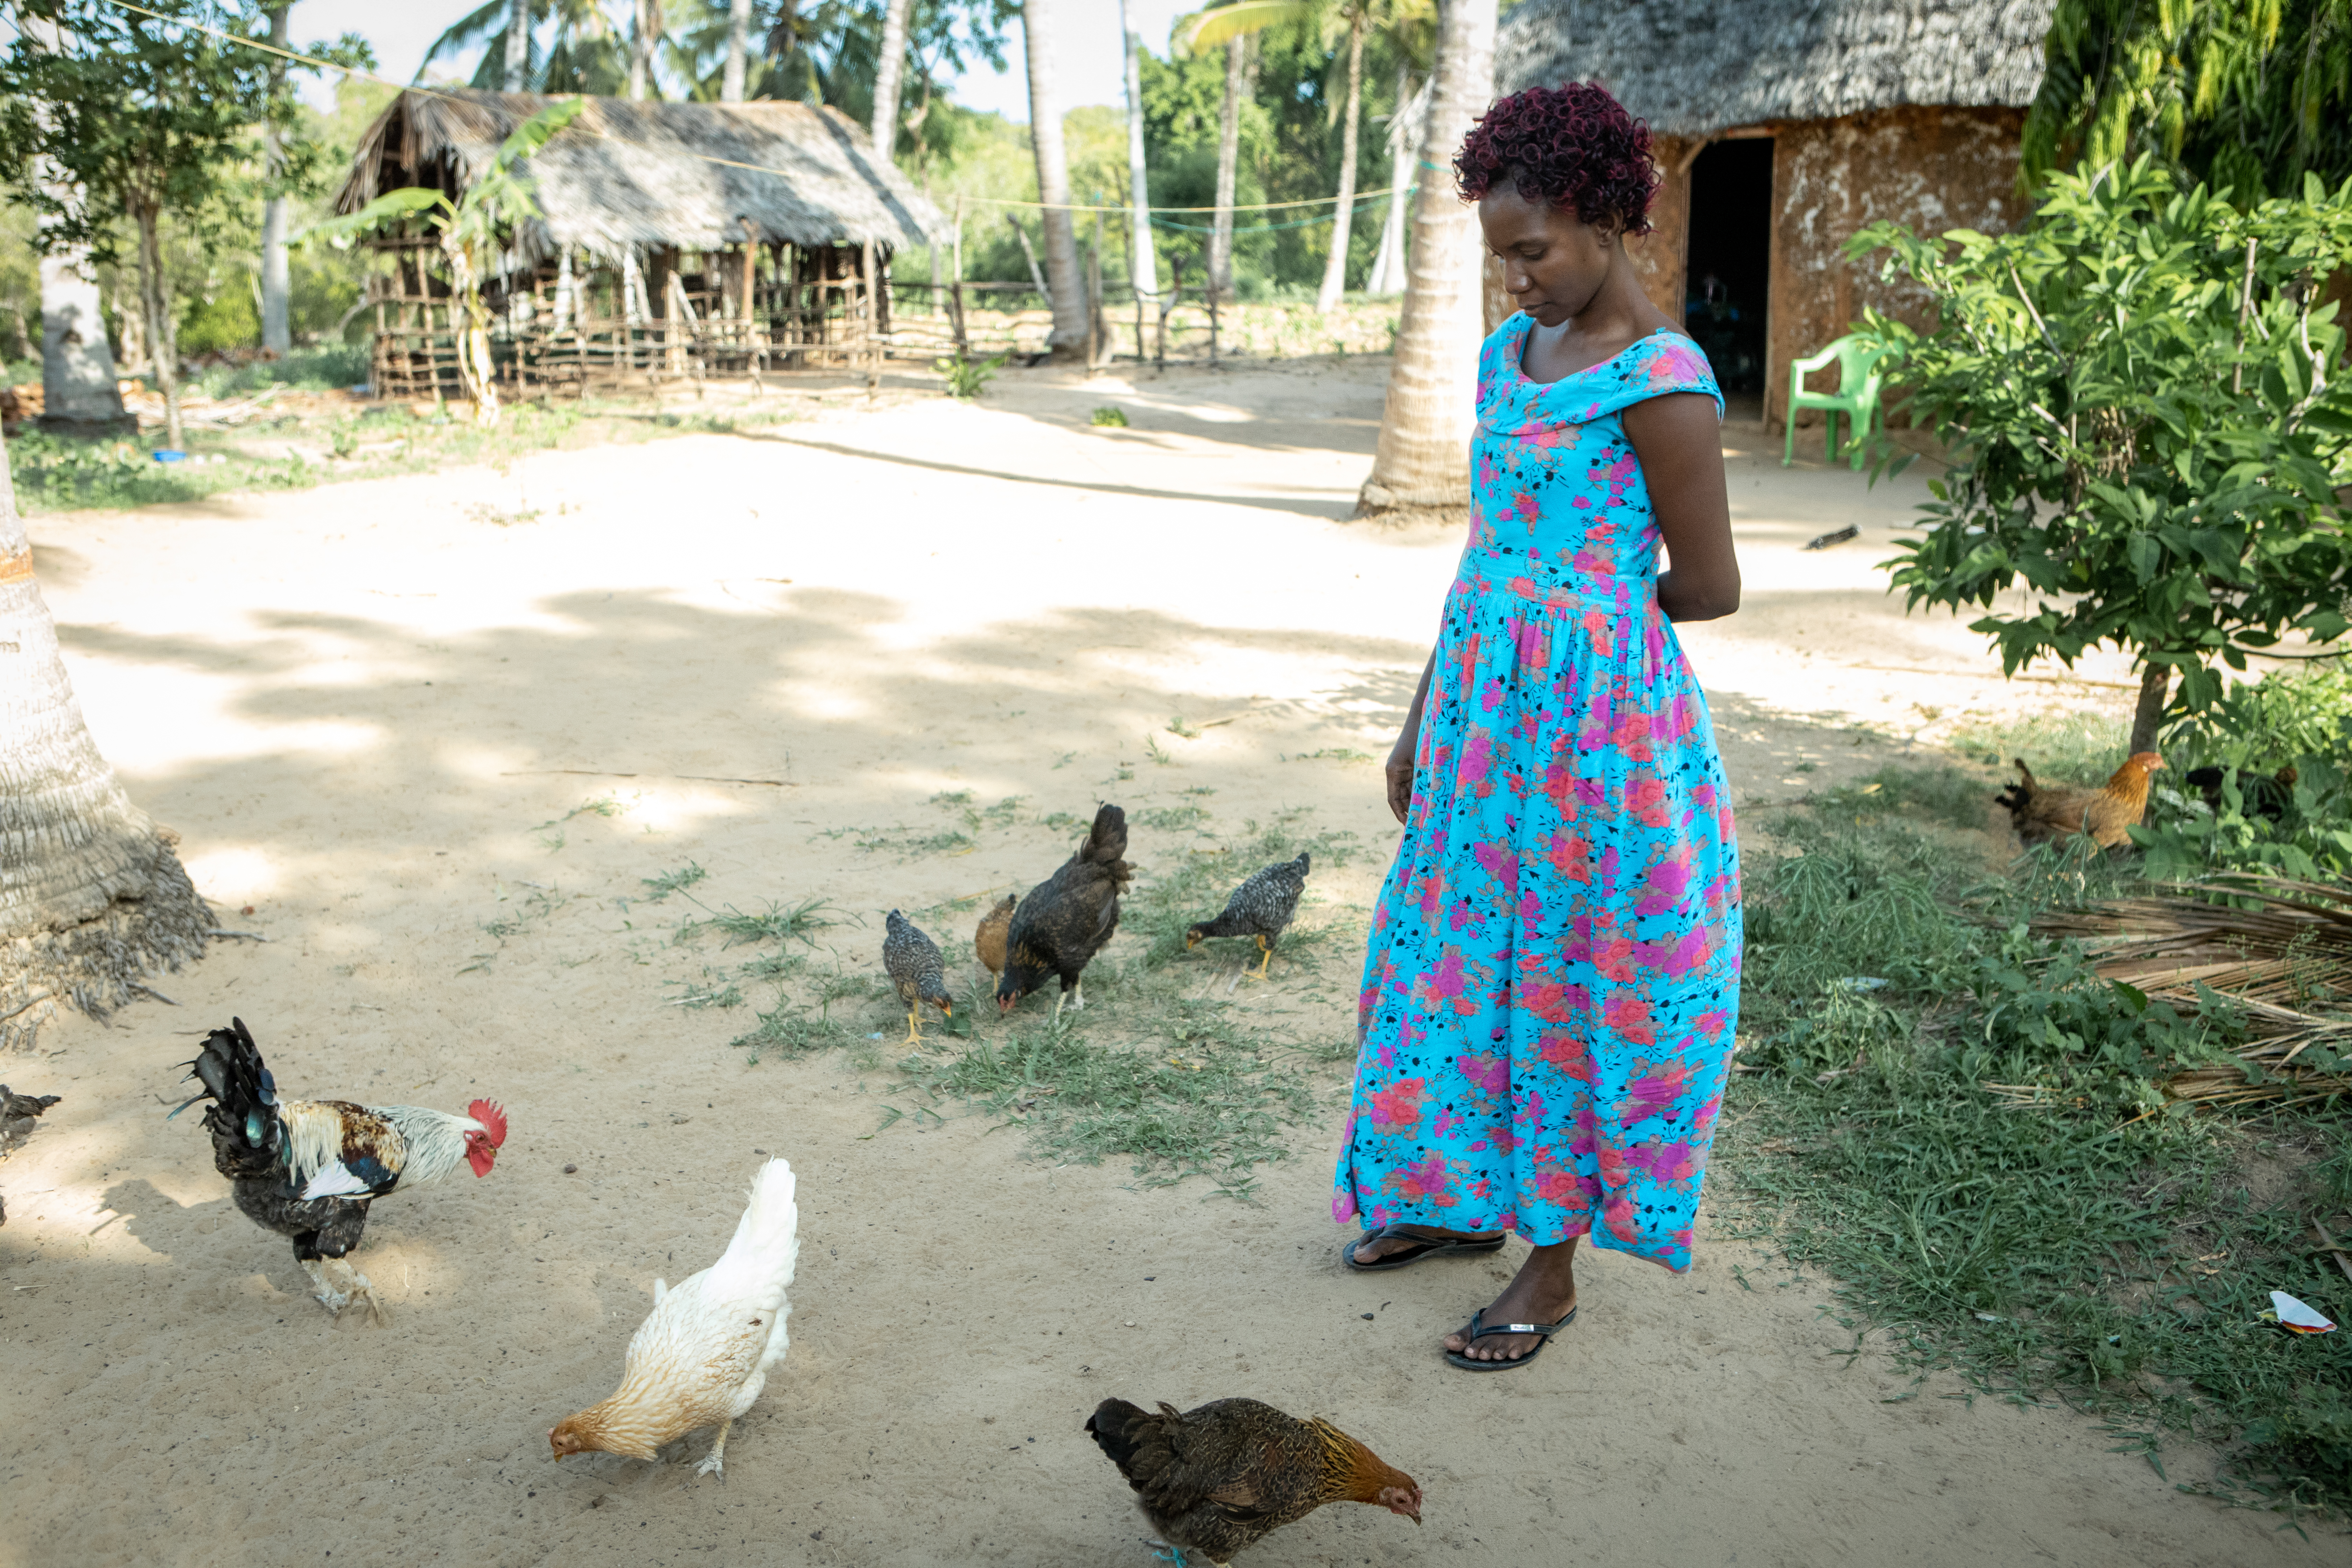 Josephine and her chicken at her home in Kilifi, Kenya